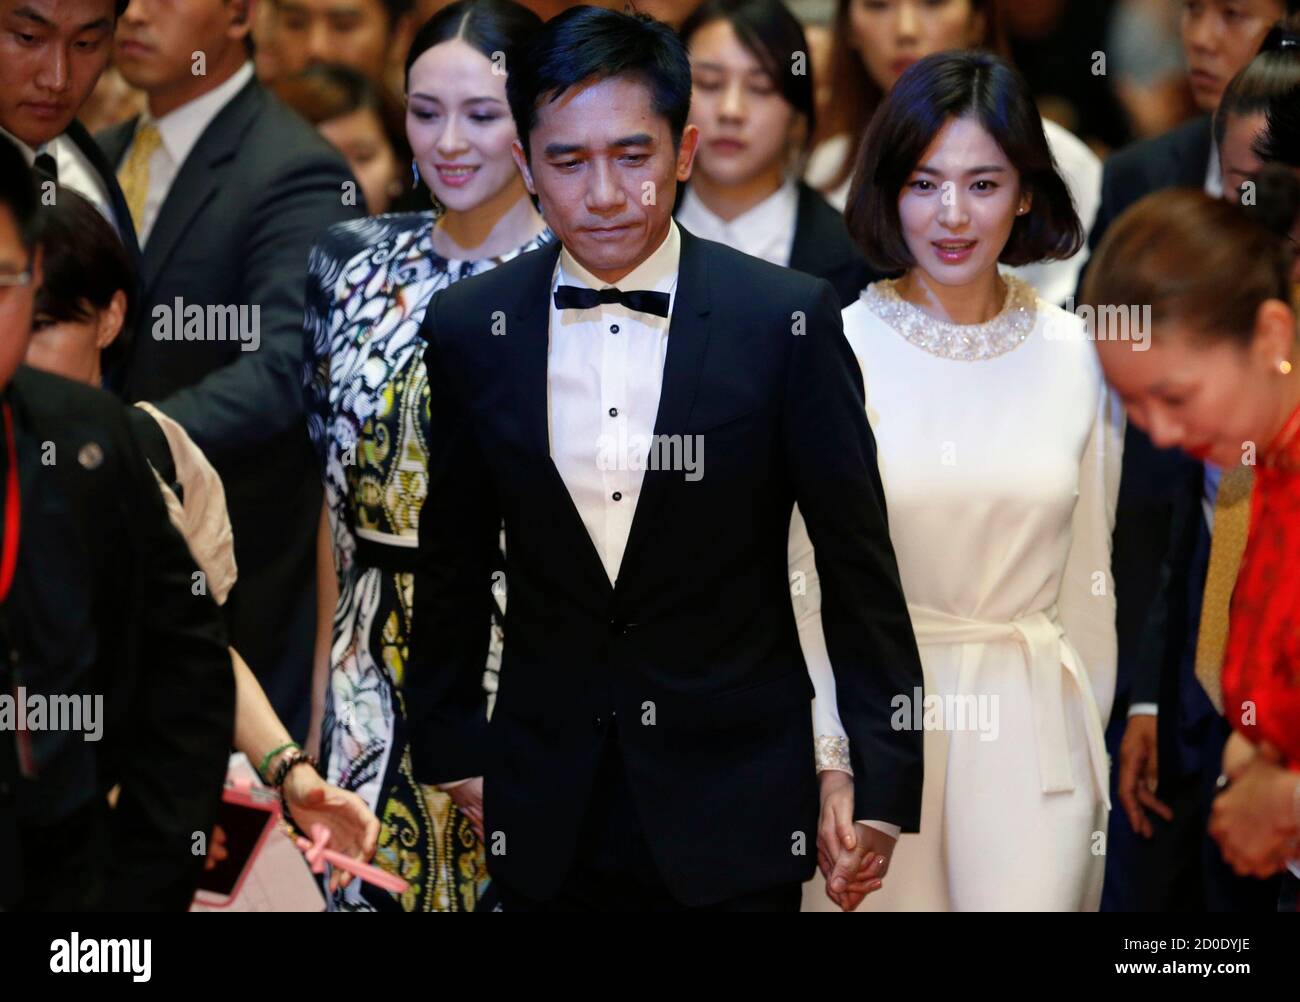 Cast members Tony Leung Chiu Wai (C), Zhang Ziyi (L) and Song Hye-kyo walk on the red carpet during an event promoting their movie 'The Grandmaster', the opening film of the Chinese Film Festival, in Seoul June 16, 2013. REUTERS/Kim Hong-Ji (SOUTH KOREA - Tags: ENTERTAINMENT) Stock Photo